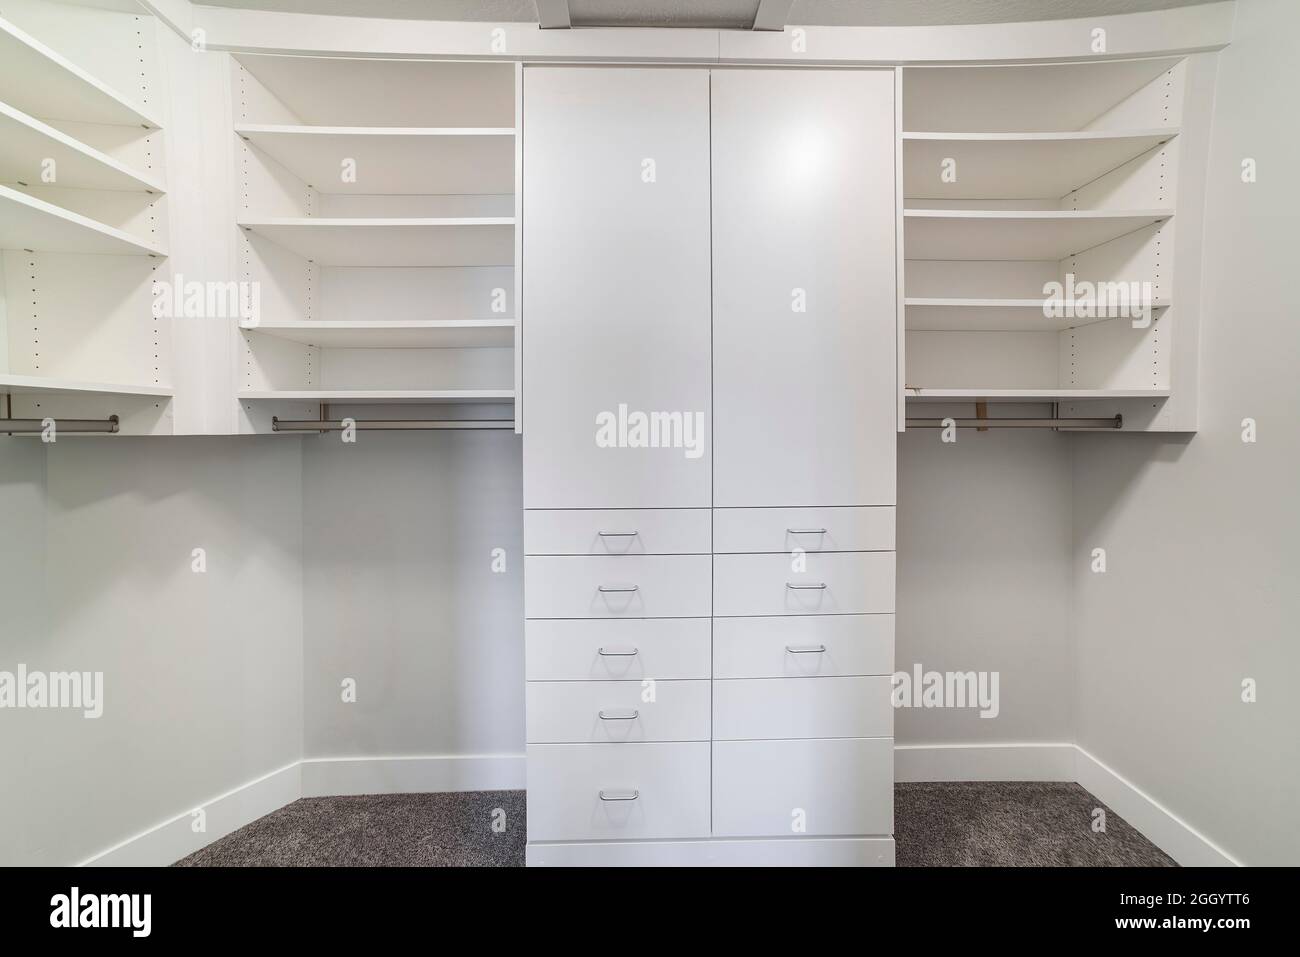 https://c8.alamy.com/comp/2GGYTT6/white-windowless-walk-in-closet-with-tall-cabinet-in-the-middle-2GGYTT6.jpg